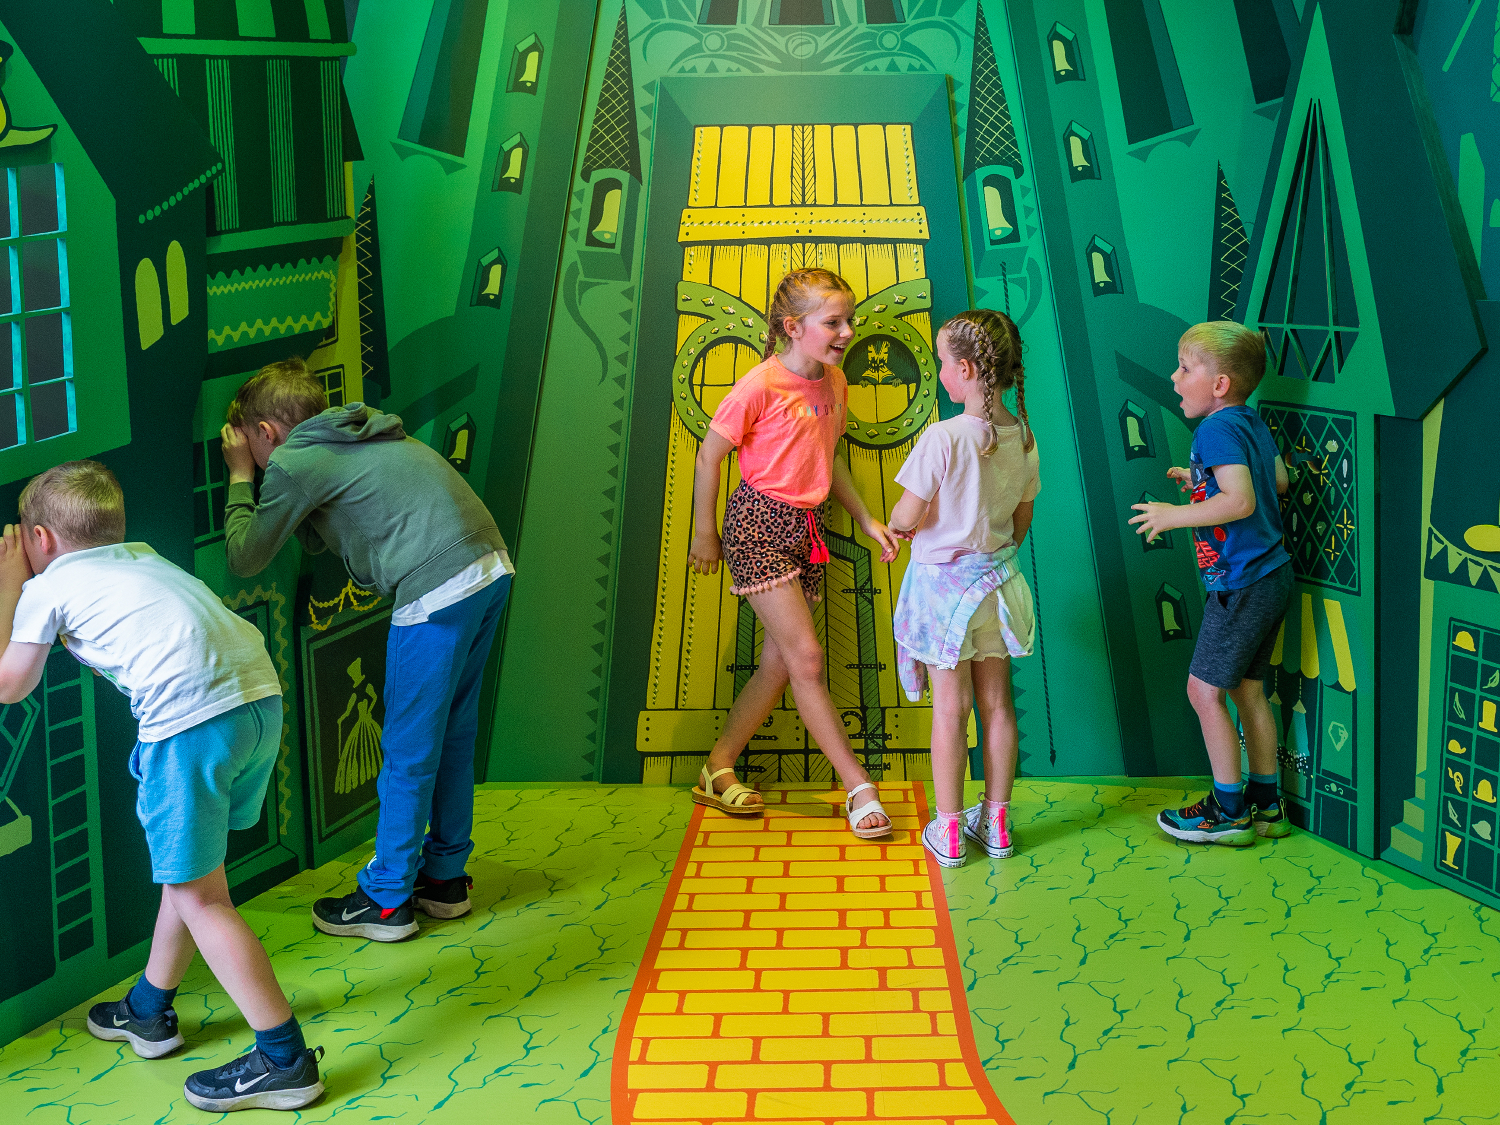 Children play at the “Wizard of Oz” exhibit at “Enchanted Journeys.” (Source: MinaLima)